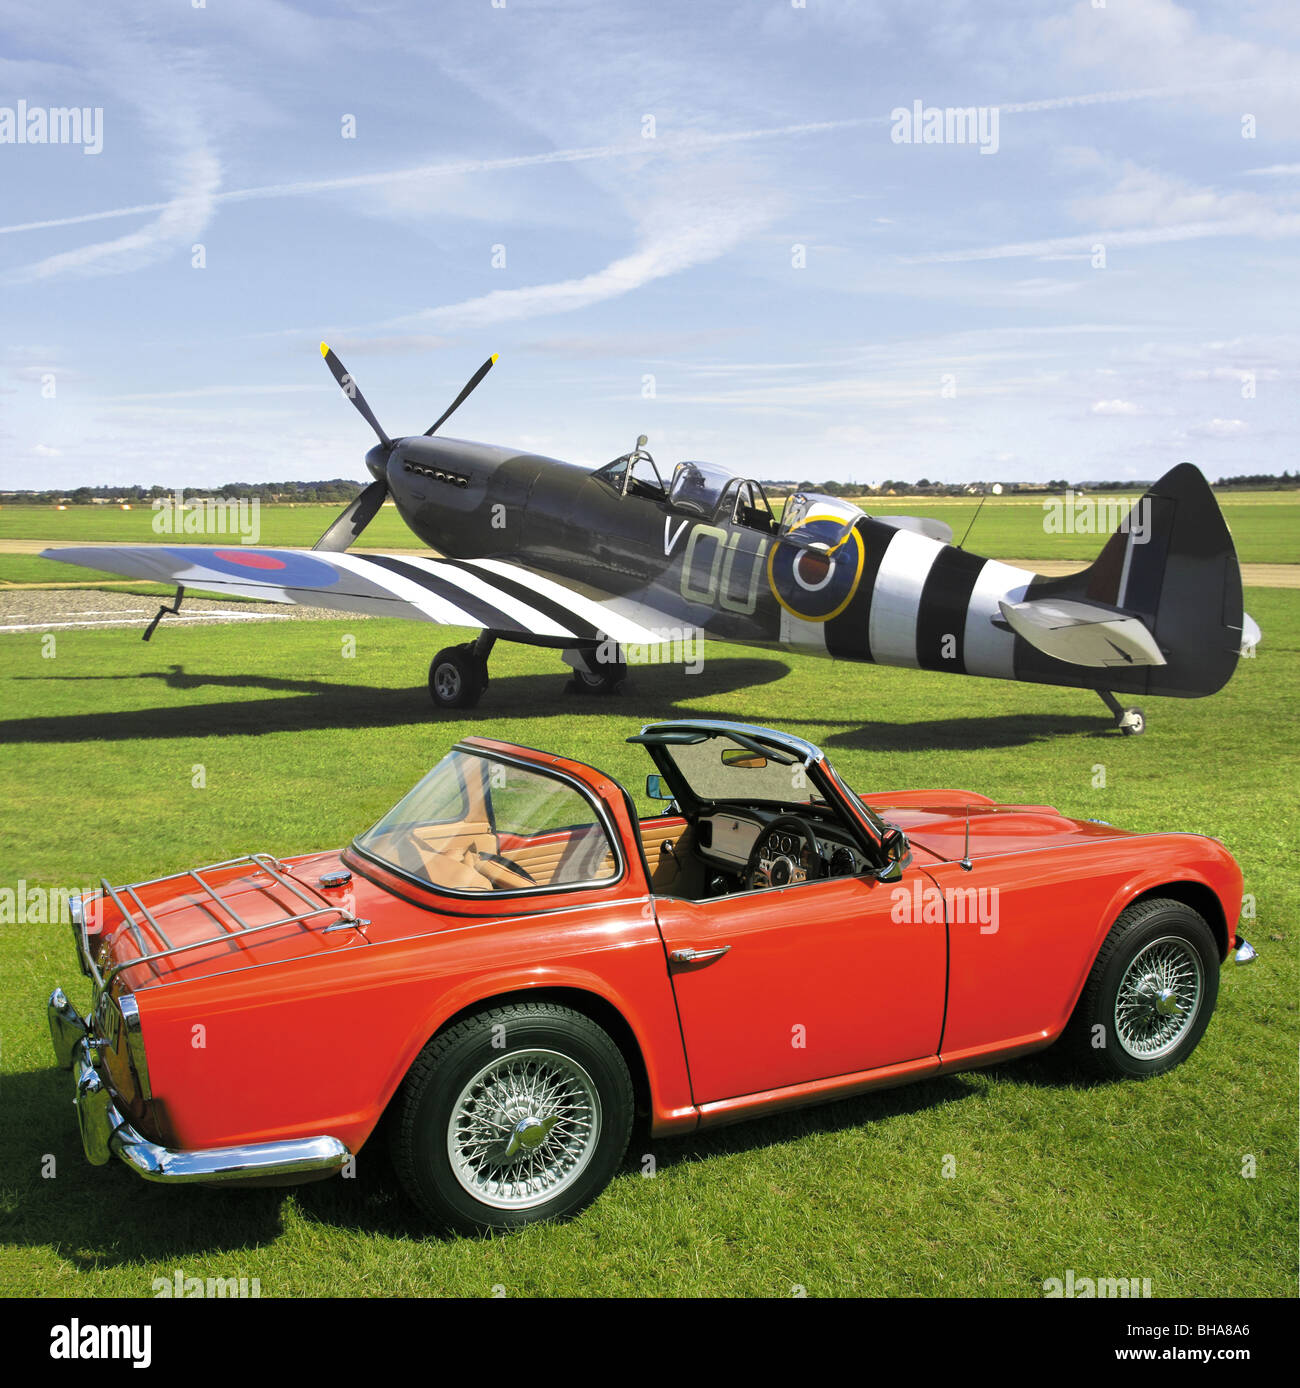 Triumph TR4 with Surrey top. Spitfire Mk9 2 seater in background. Stock Photo